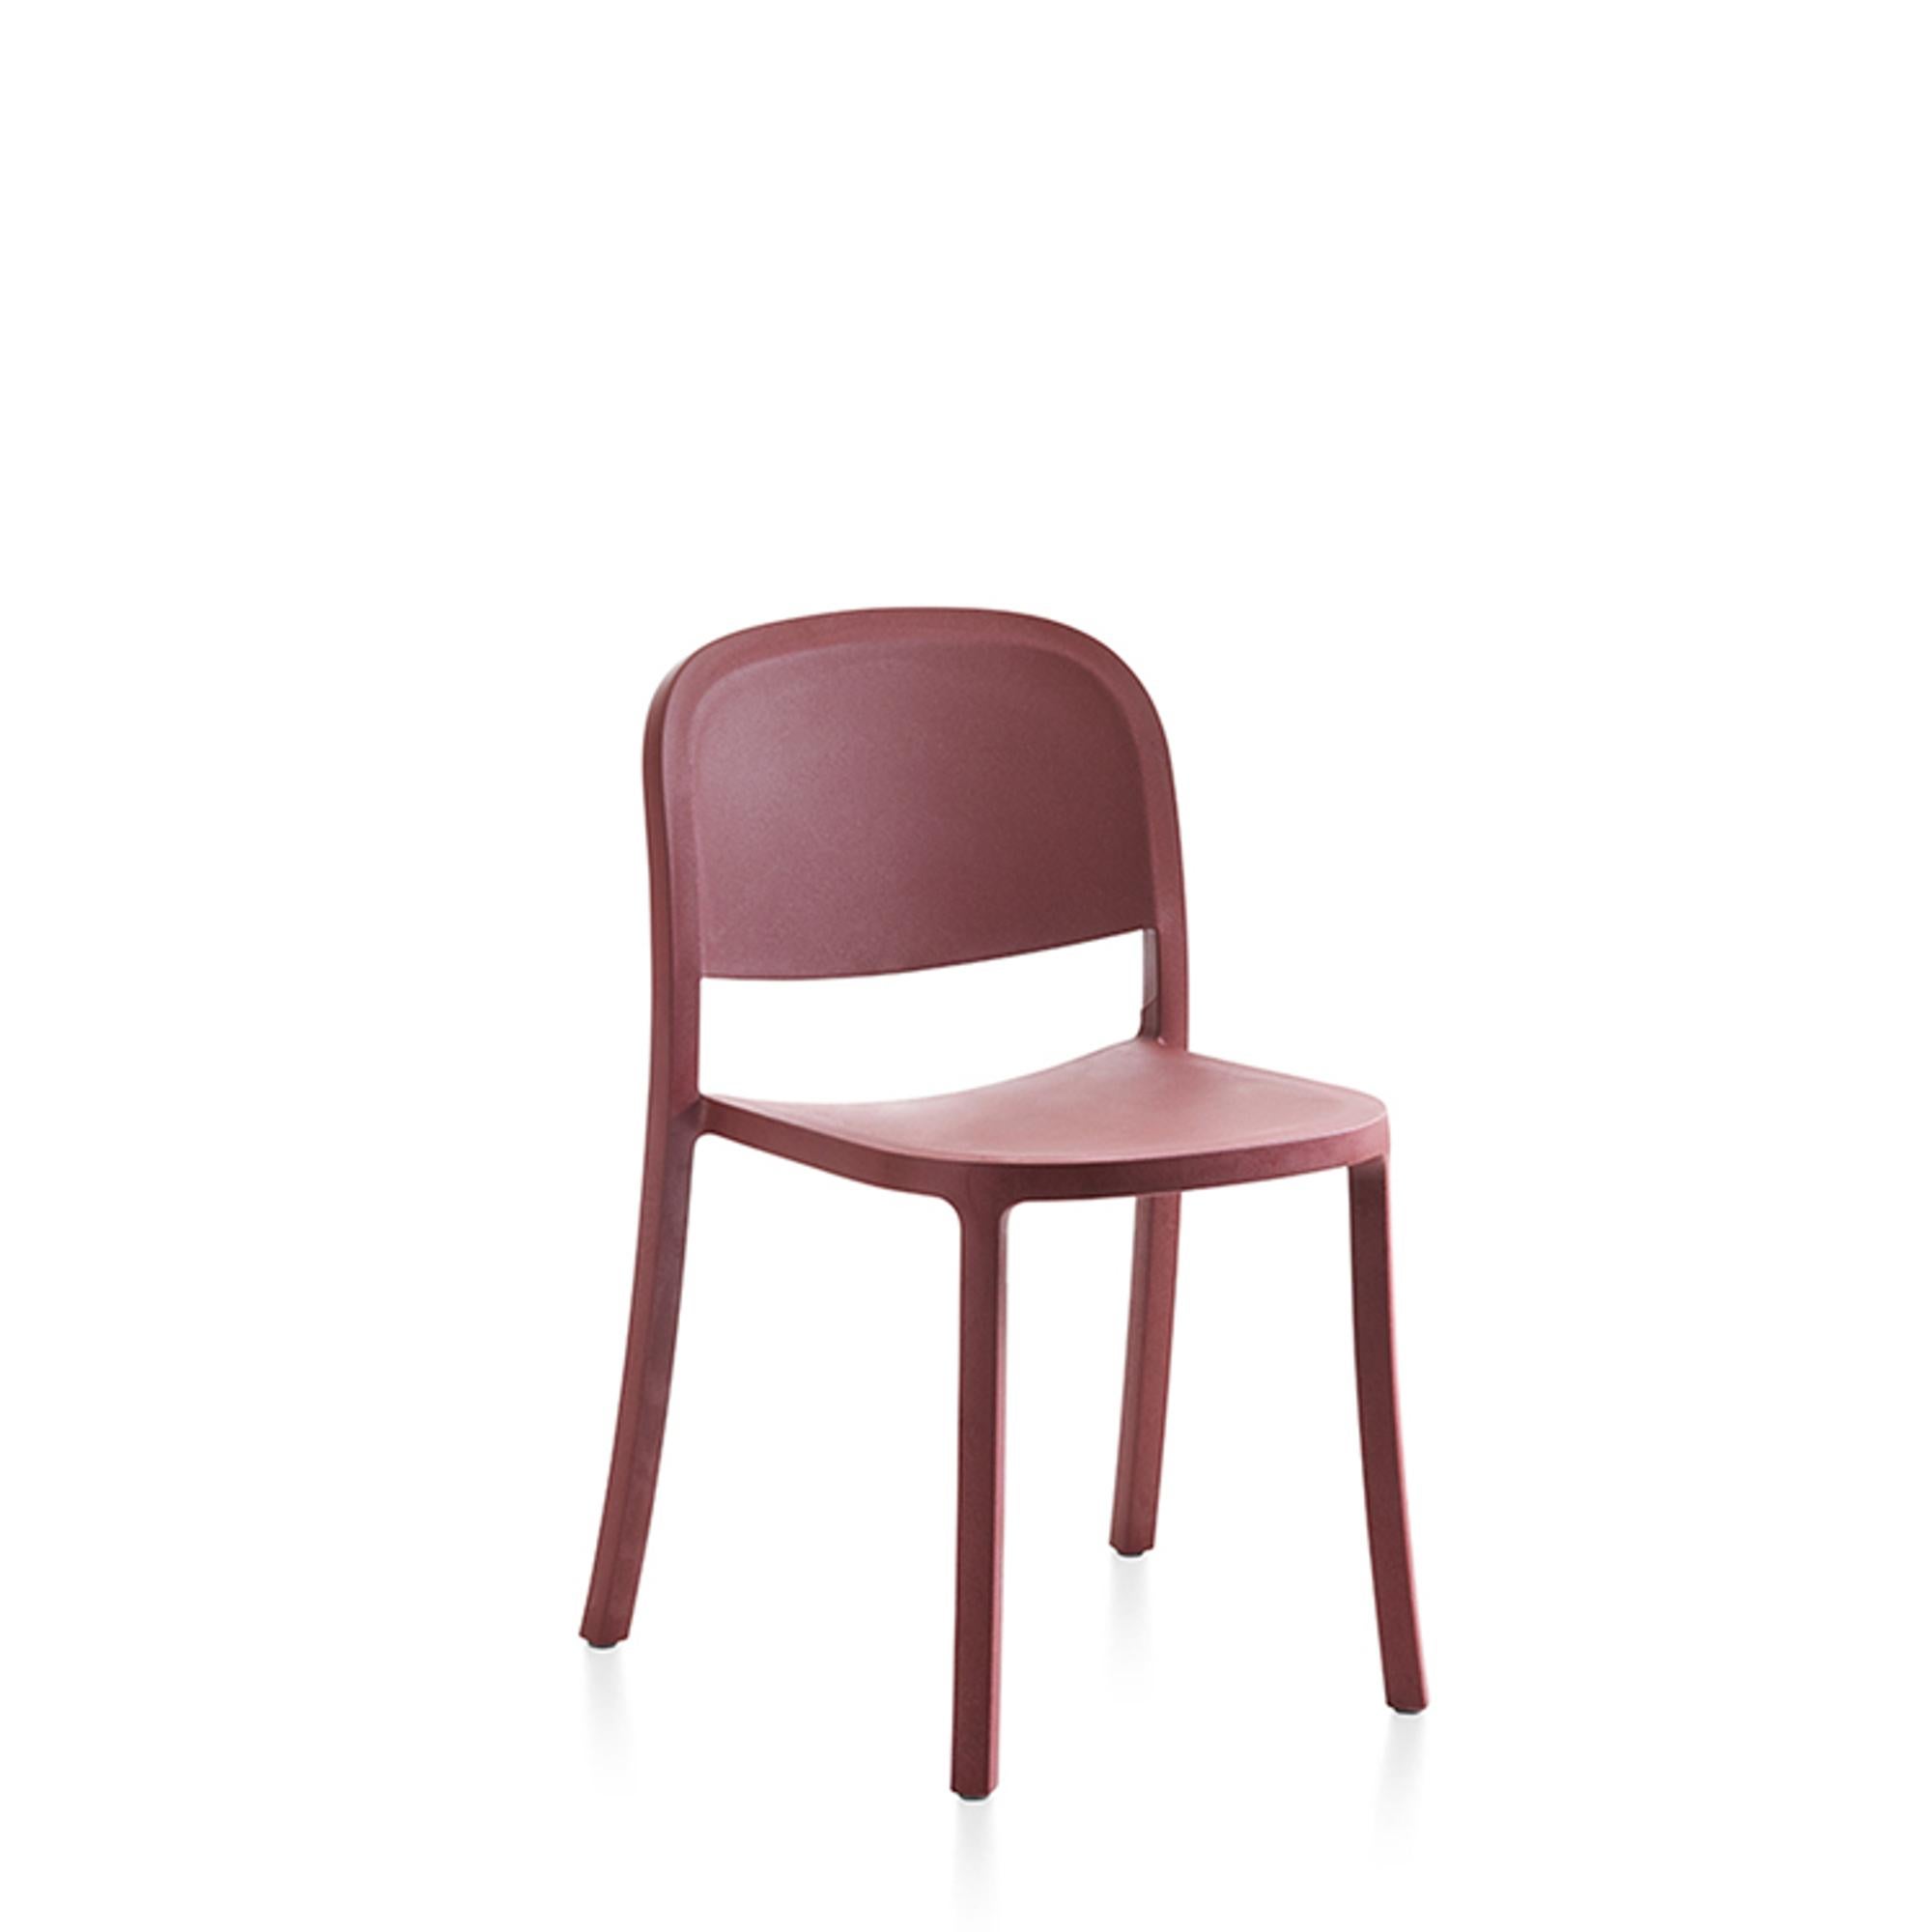 For the 1 Inch Reclaimed Jasper Morrison designed a one-piece mono-block stackable chair, that is useful and durable, engineered to meet the demands of high use environments, and suitable for both indoor and outdoor use in eight colors. Made with